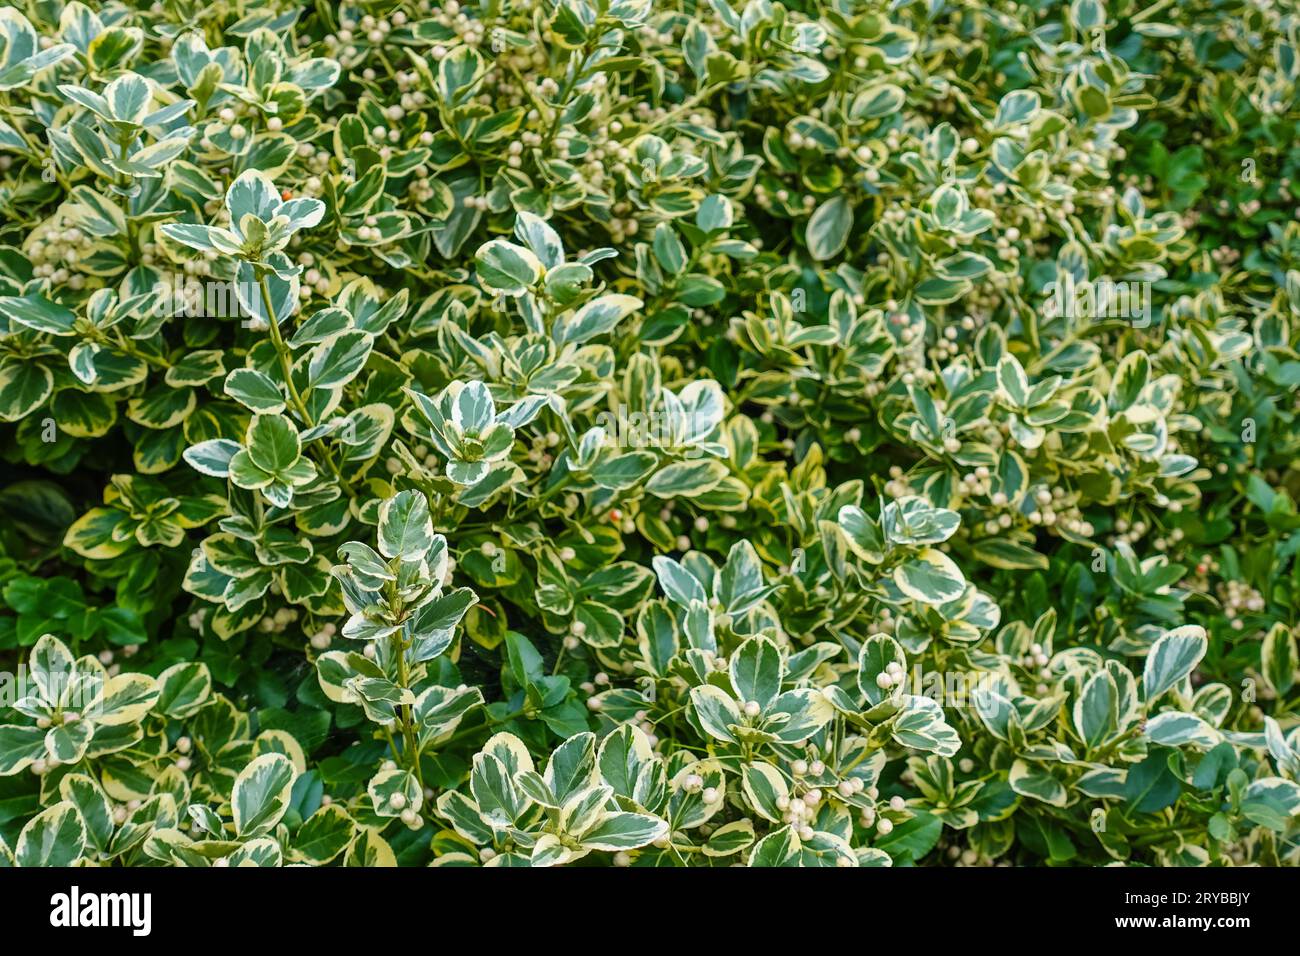 Euonymus fortunei ‘Silver Queen’ (Wintercreeper) is a bushy evergreen shrub with glossy, elongated, dark green leaves adorned with contrasting white m Stock Photo